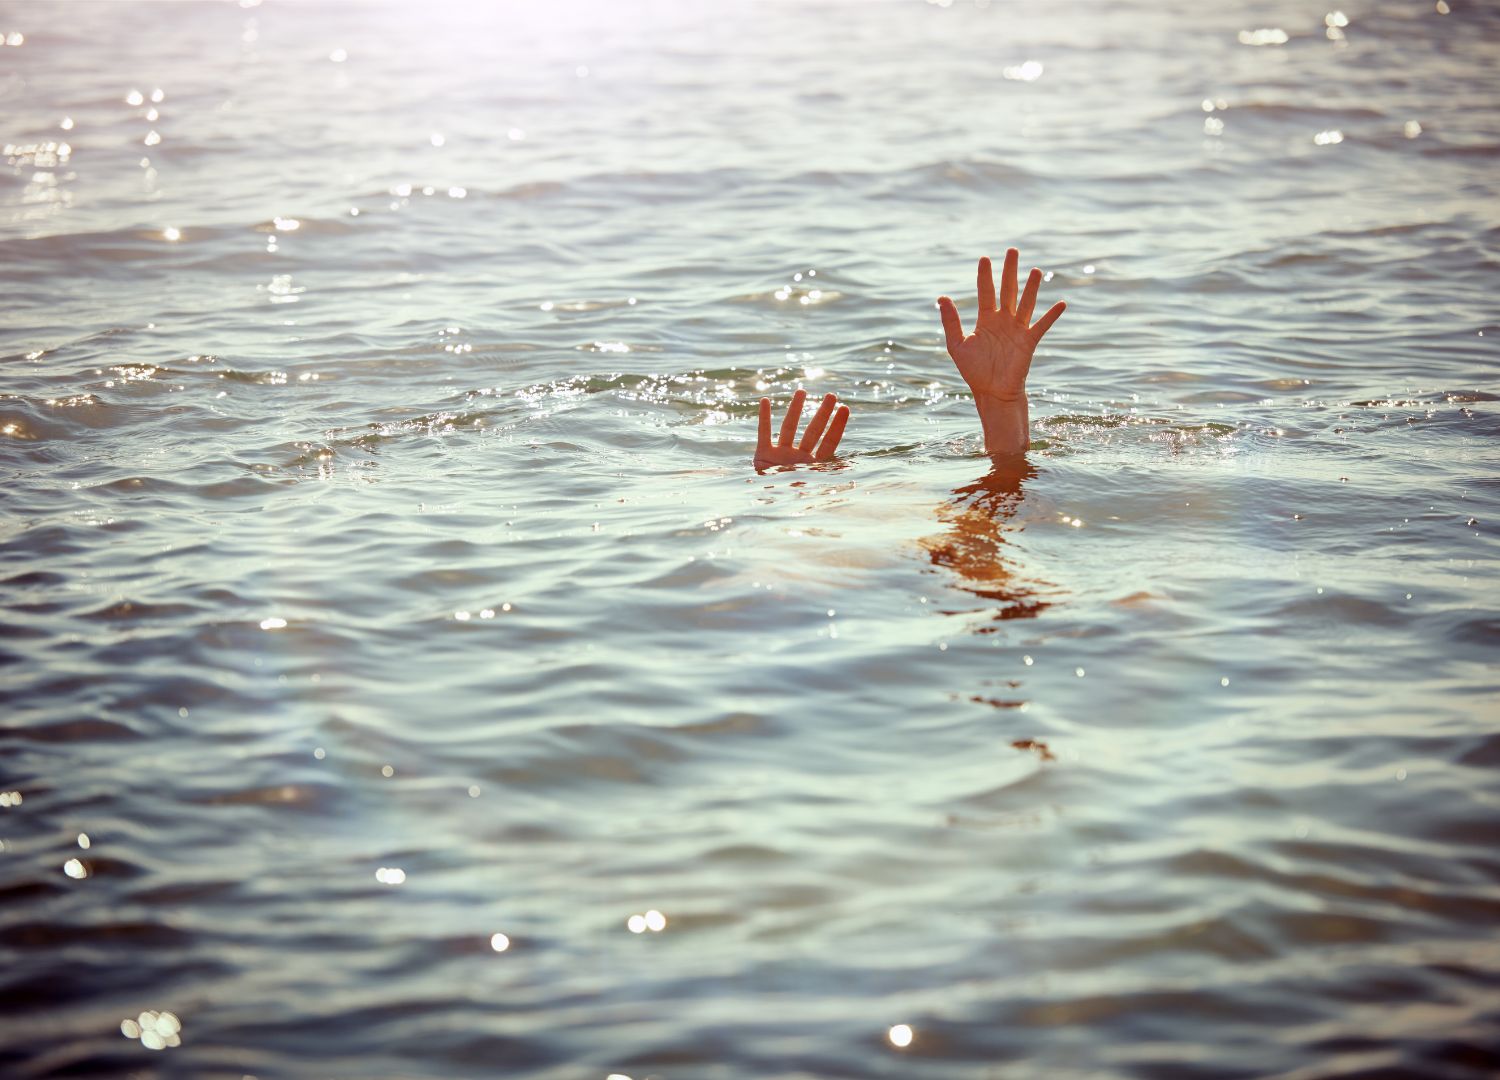 The Drowning Child: Tips to Save their Life